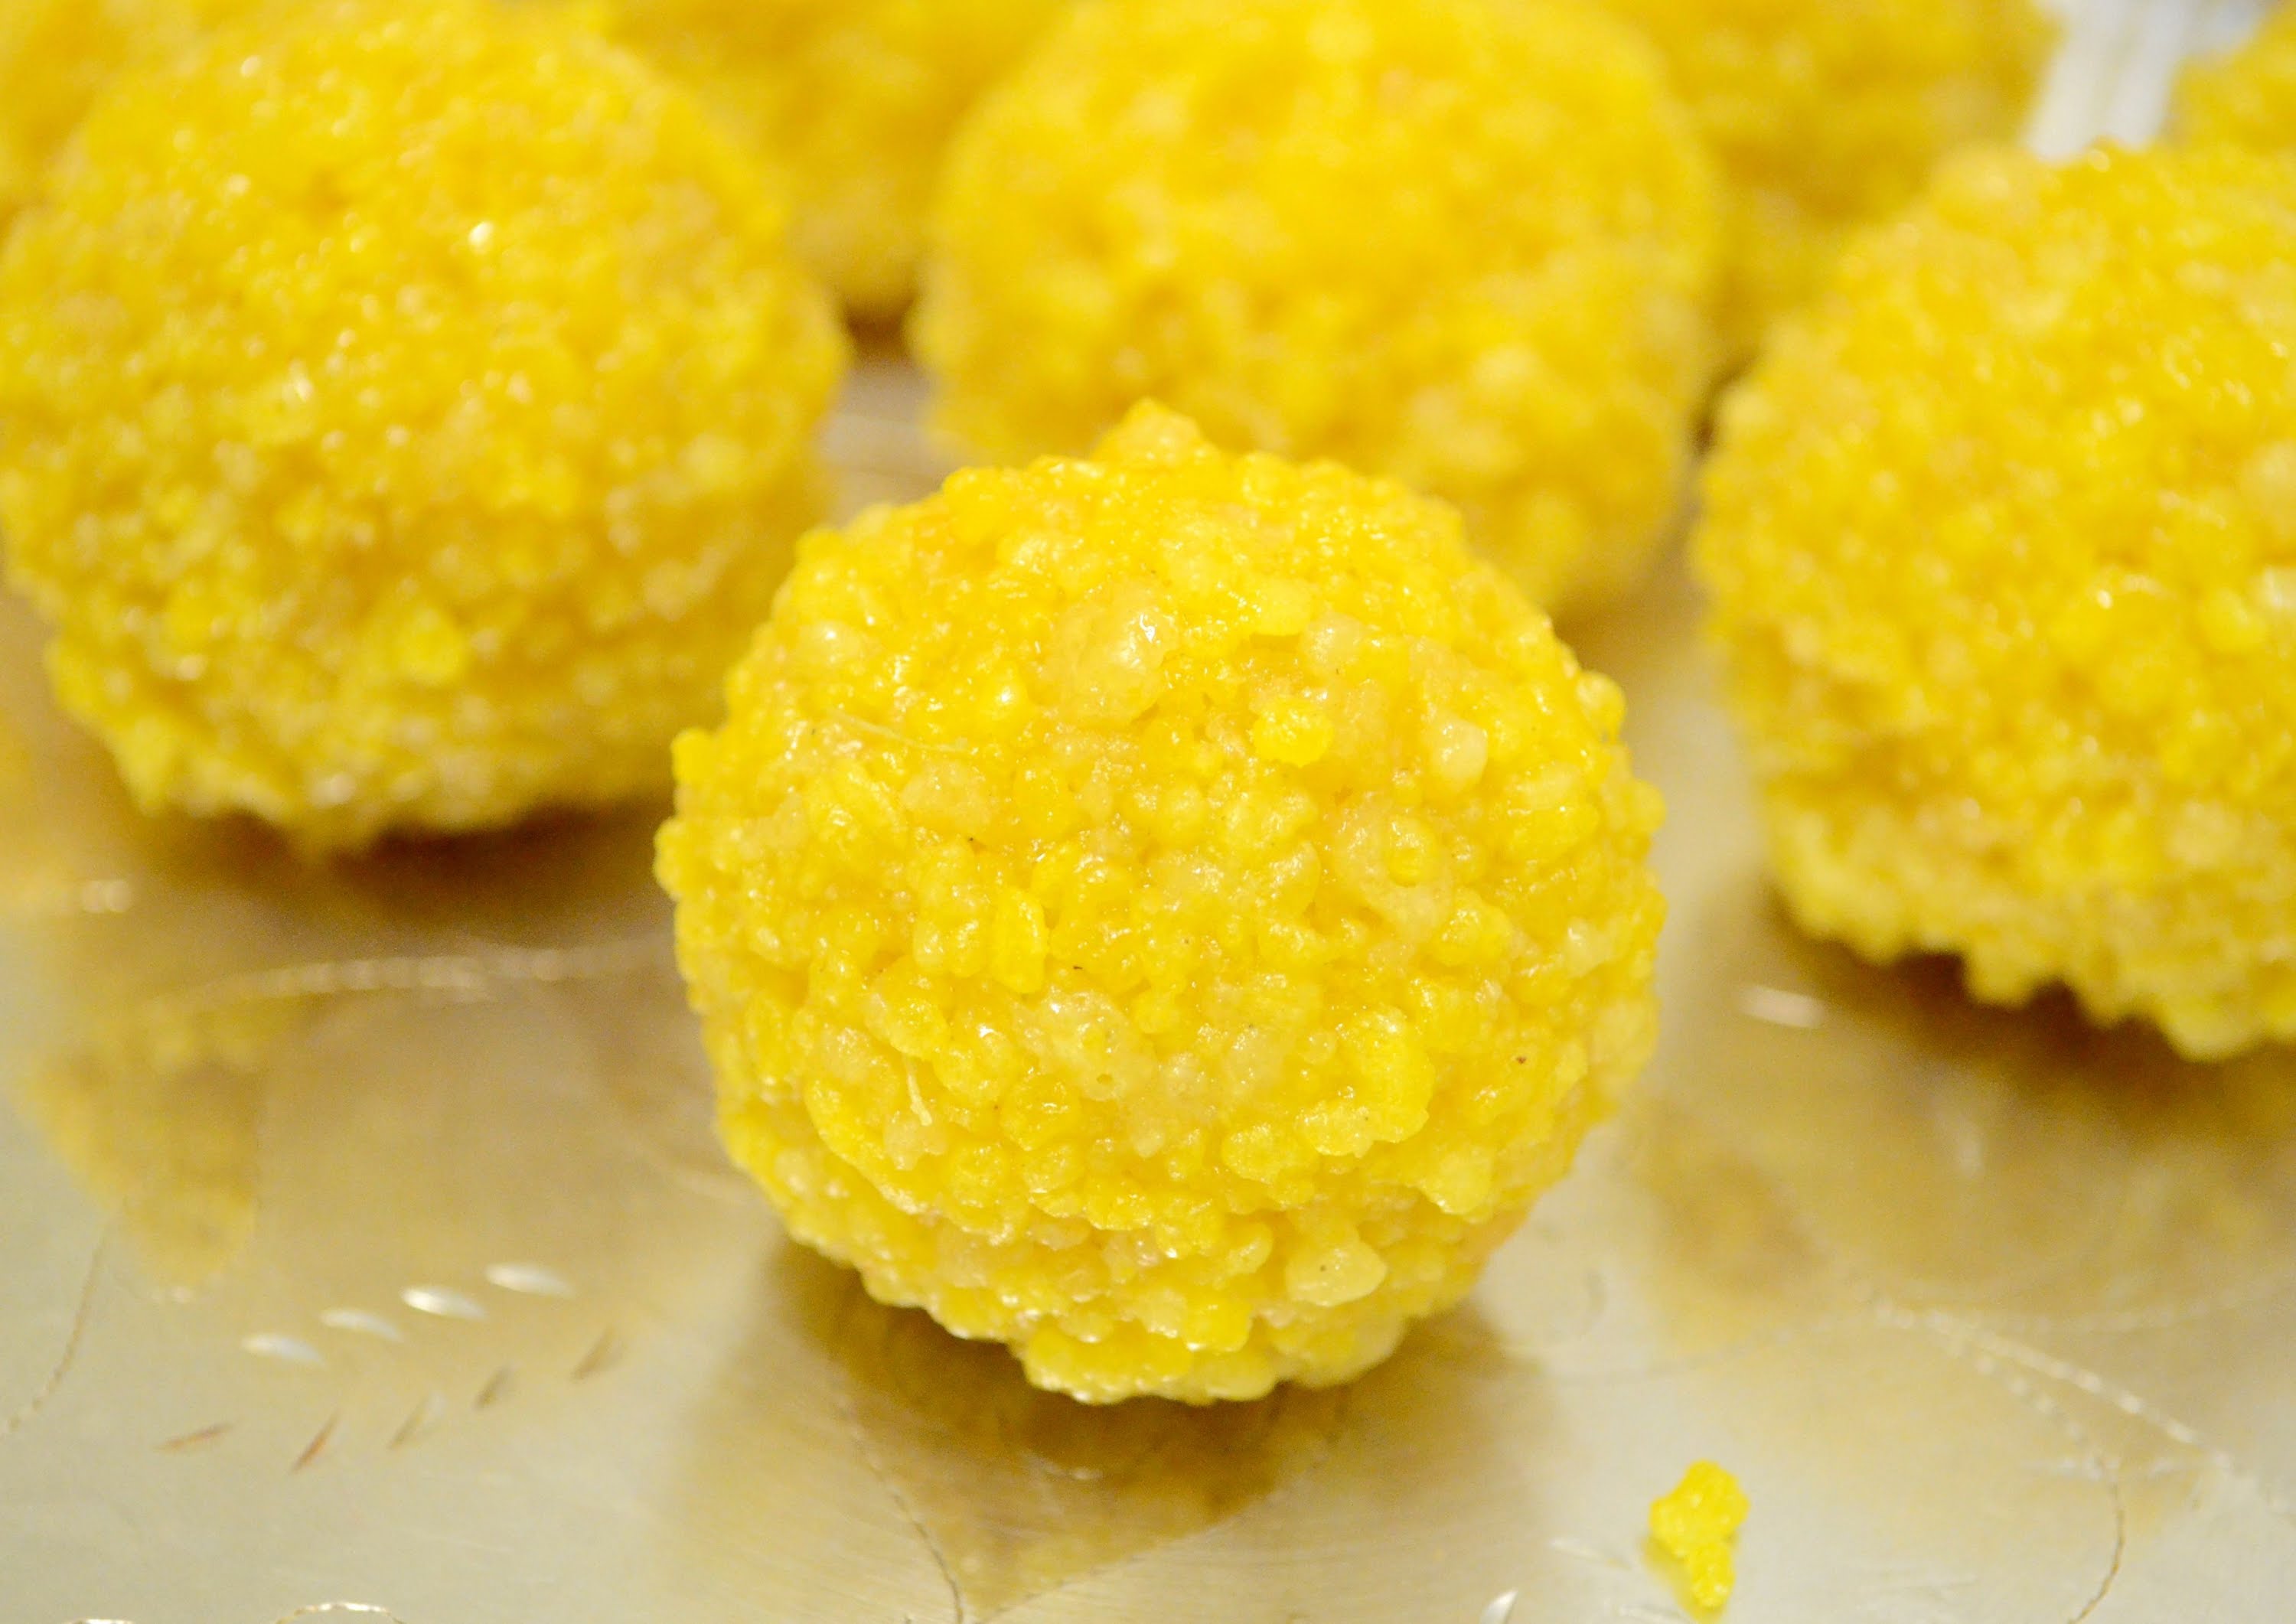 Manufacturers,Exporters,Suppliers of Boondi Laddu